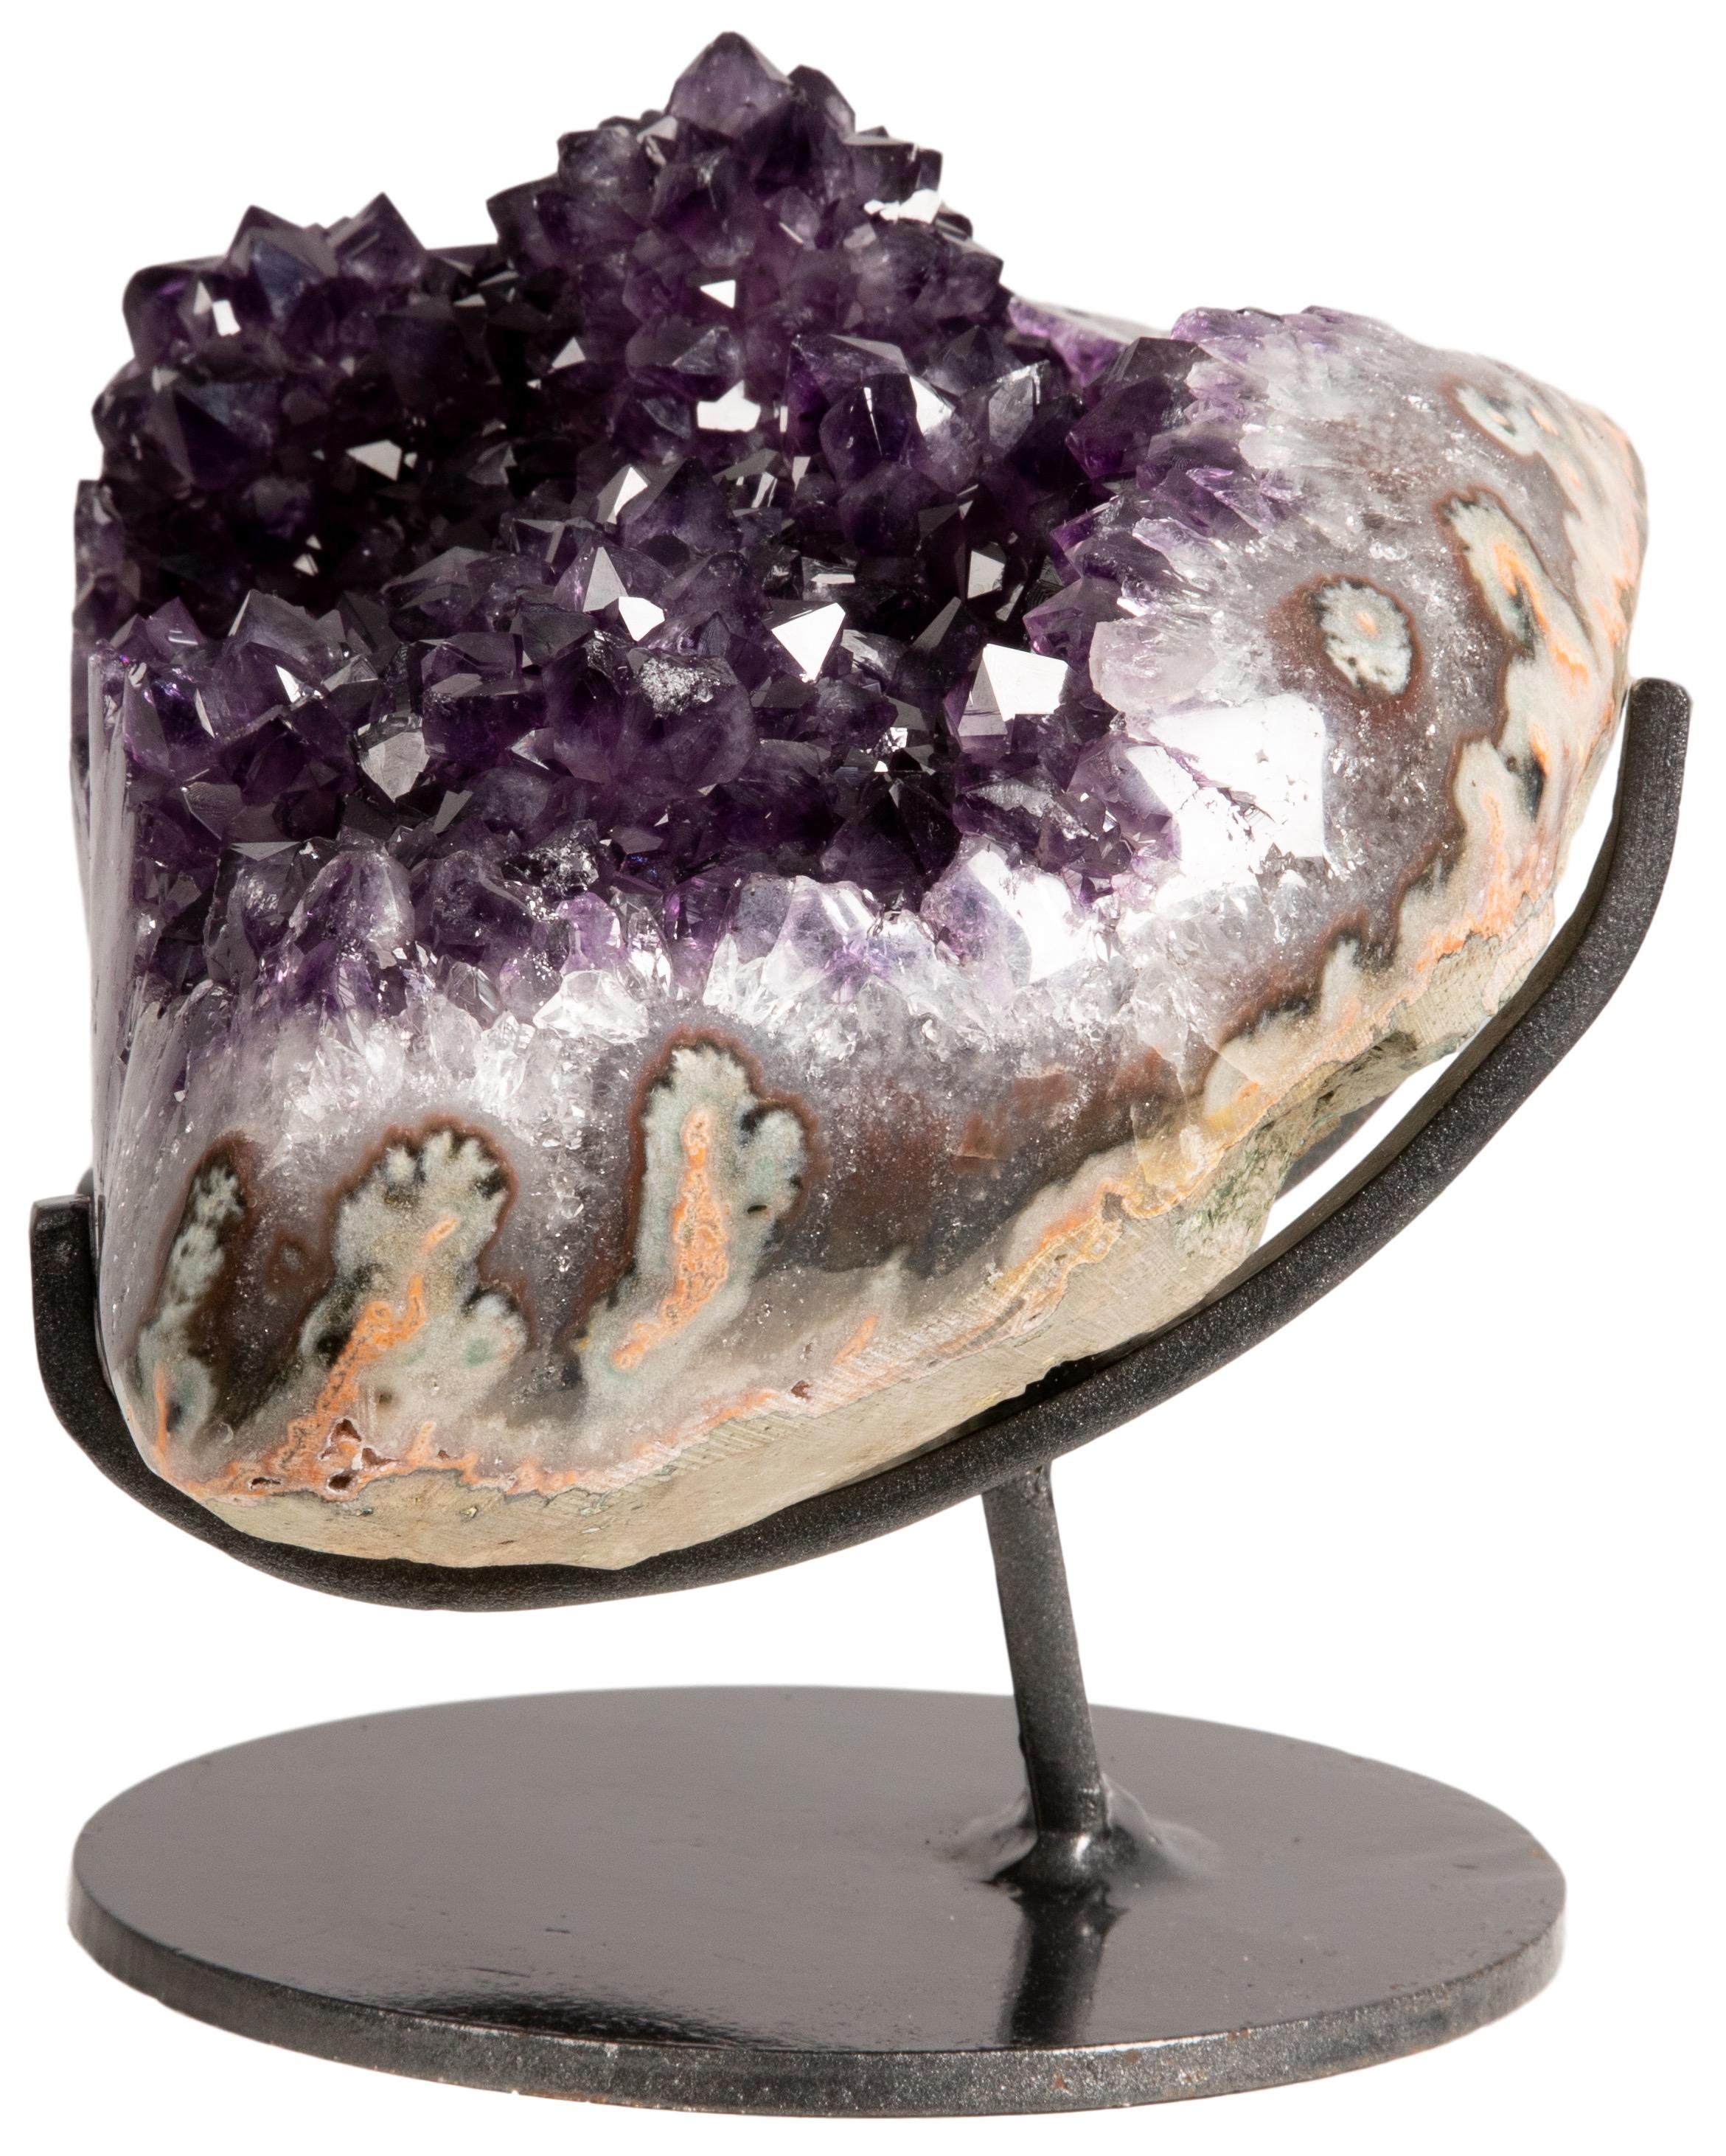 This piece comprises a stunning example of deep purple amethyst, elegantly displayed on a metal stand, with a naturally decorative multiple stalactite formation. 

The polished borders of the formation allow one to appreciate the visible grey and